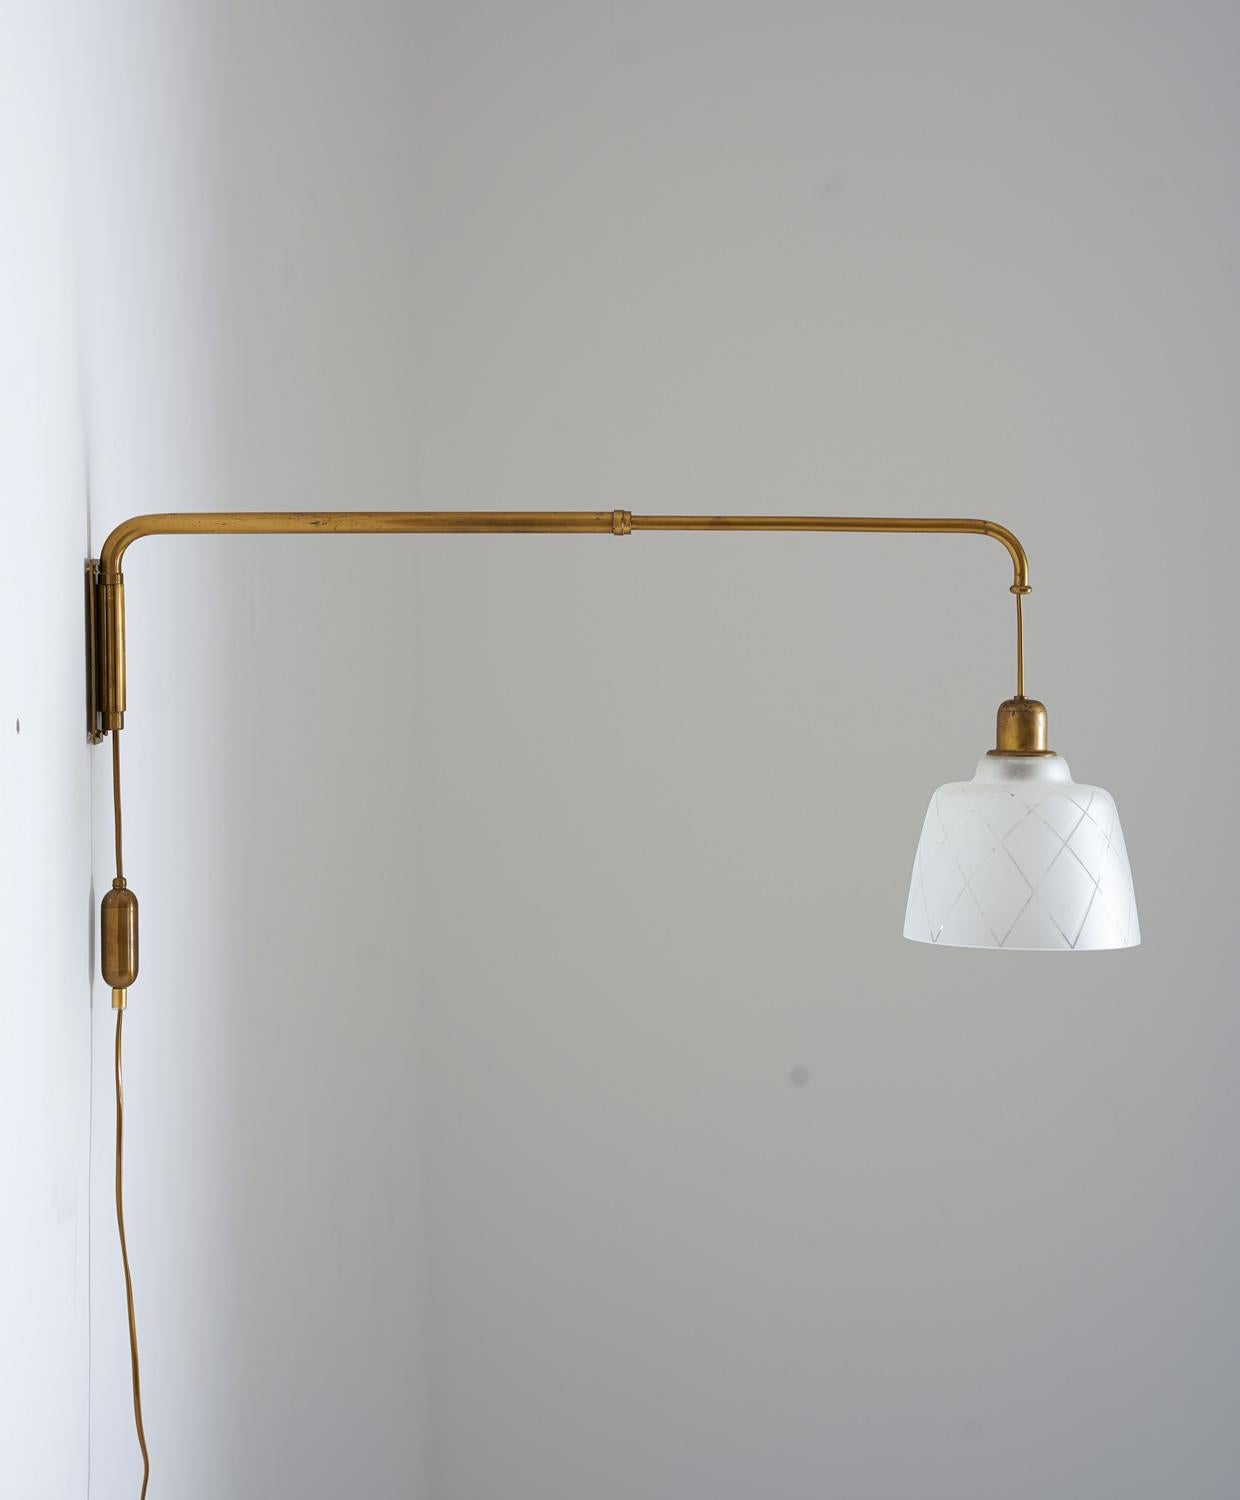 Beautiful wall lamp, manufactured in Sweden circa 1940.
This lamp consists of an extendable brass rod, holding the beautiful frosted glass shade. A counterweight keeps the shade in place and the length of the rod can be adjusted between 50 to